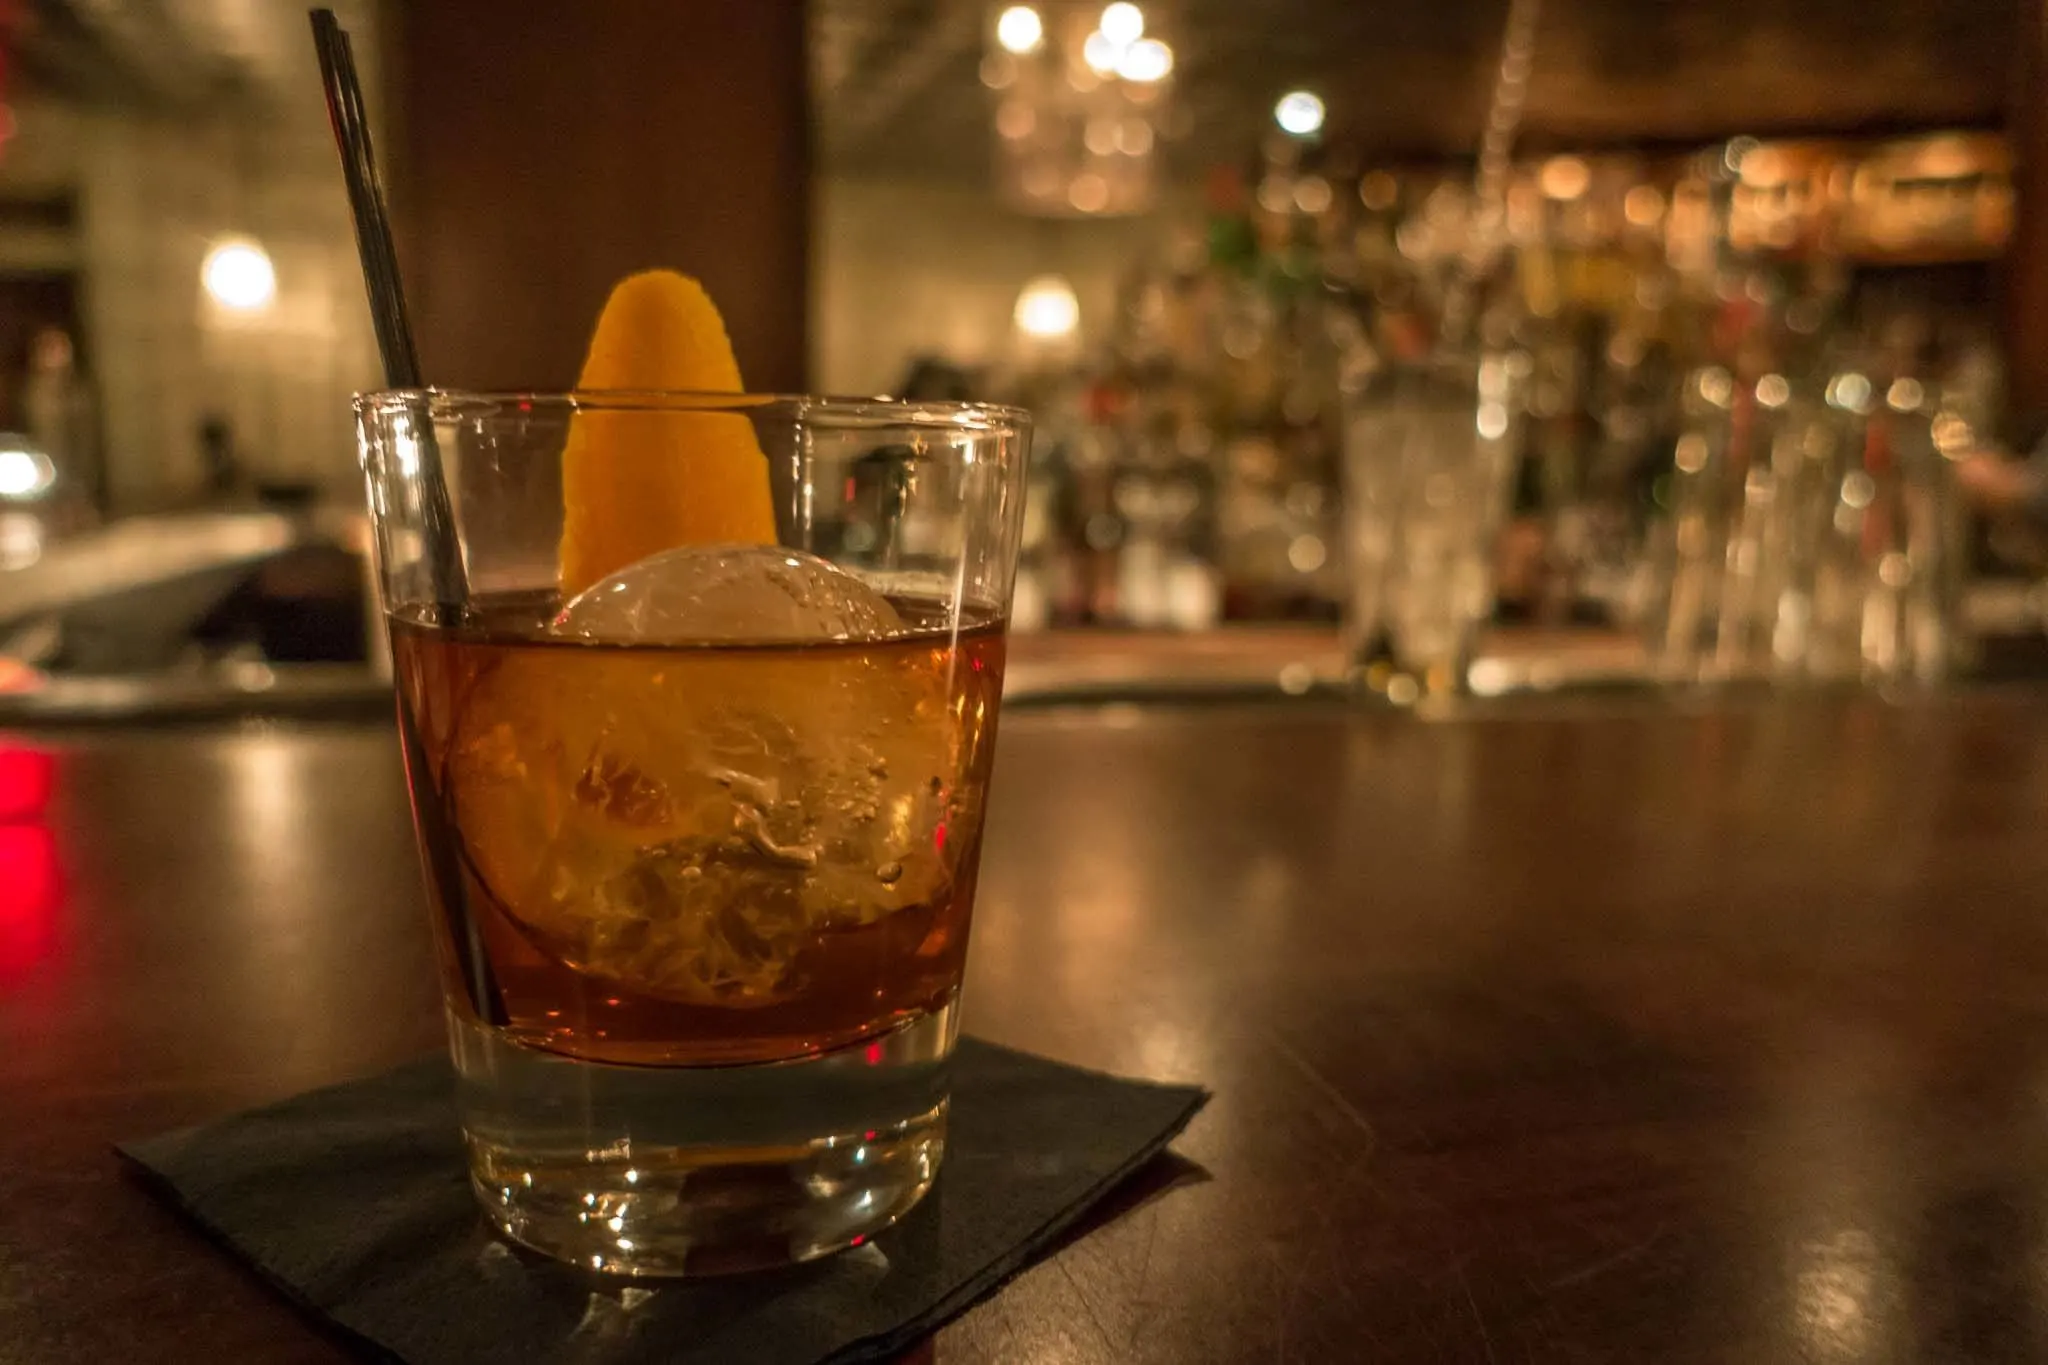 Whiskey in a glass with a large ice cube and orange garnish sitting on a wooden bar